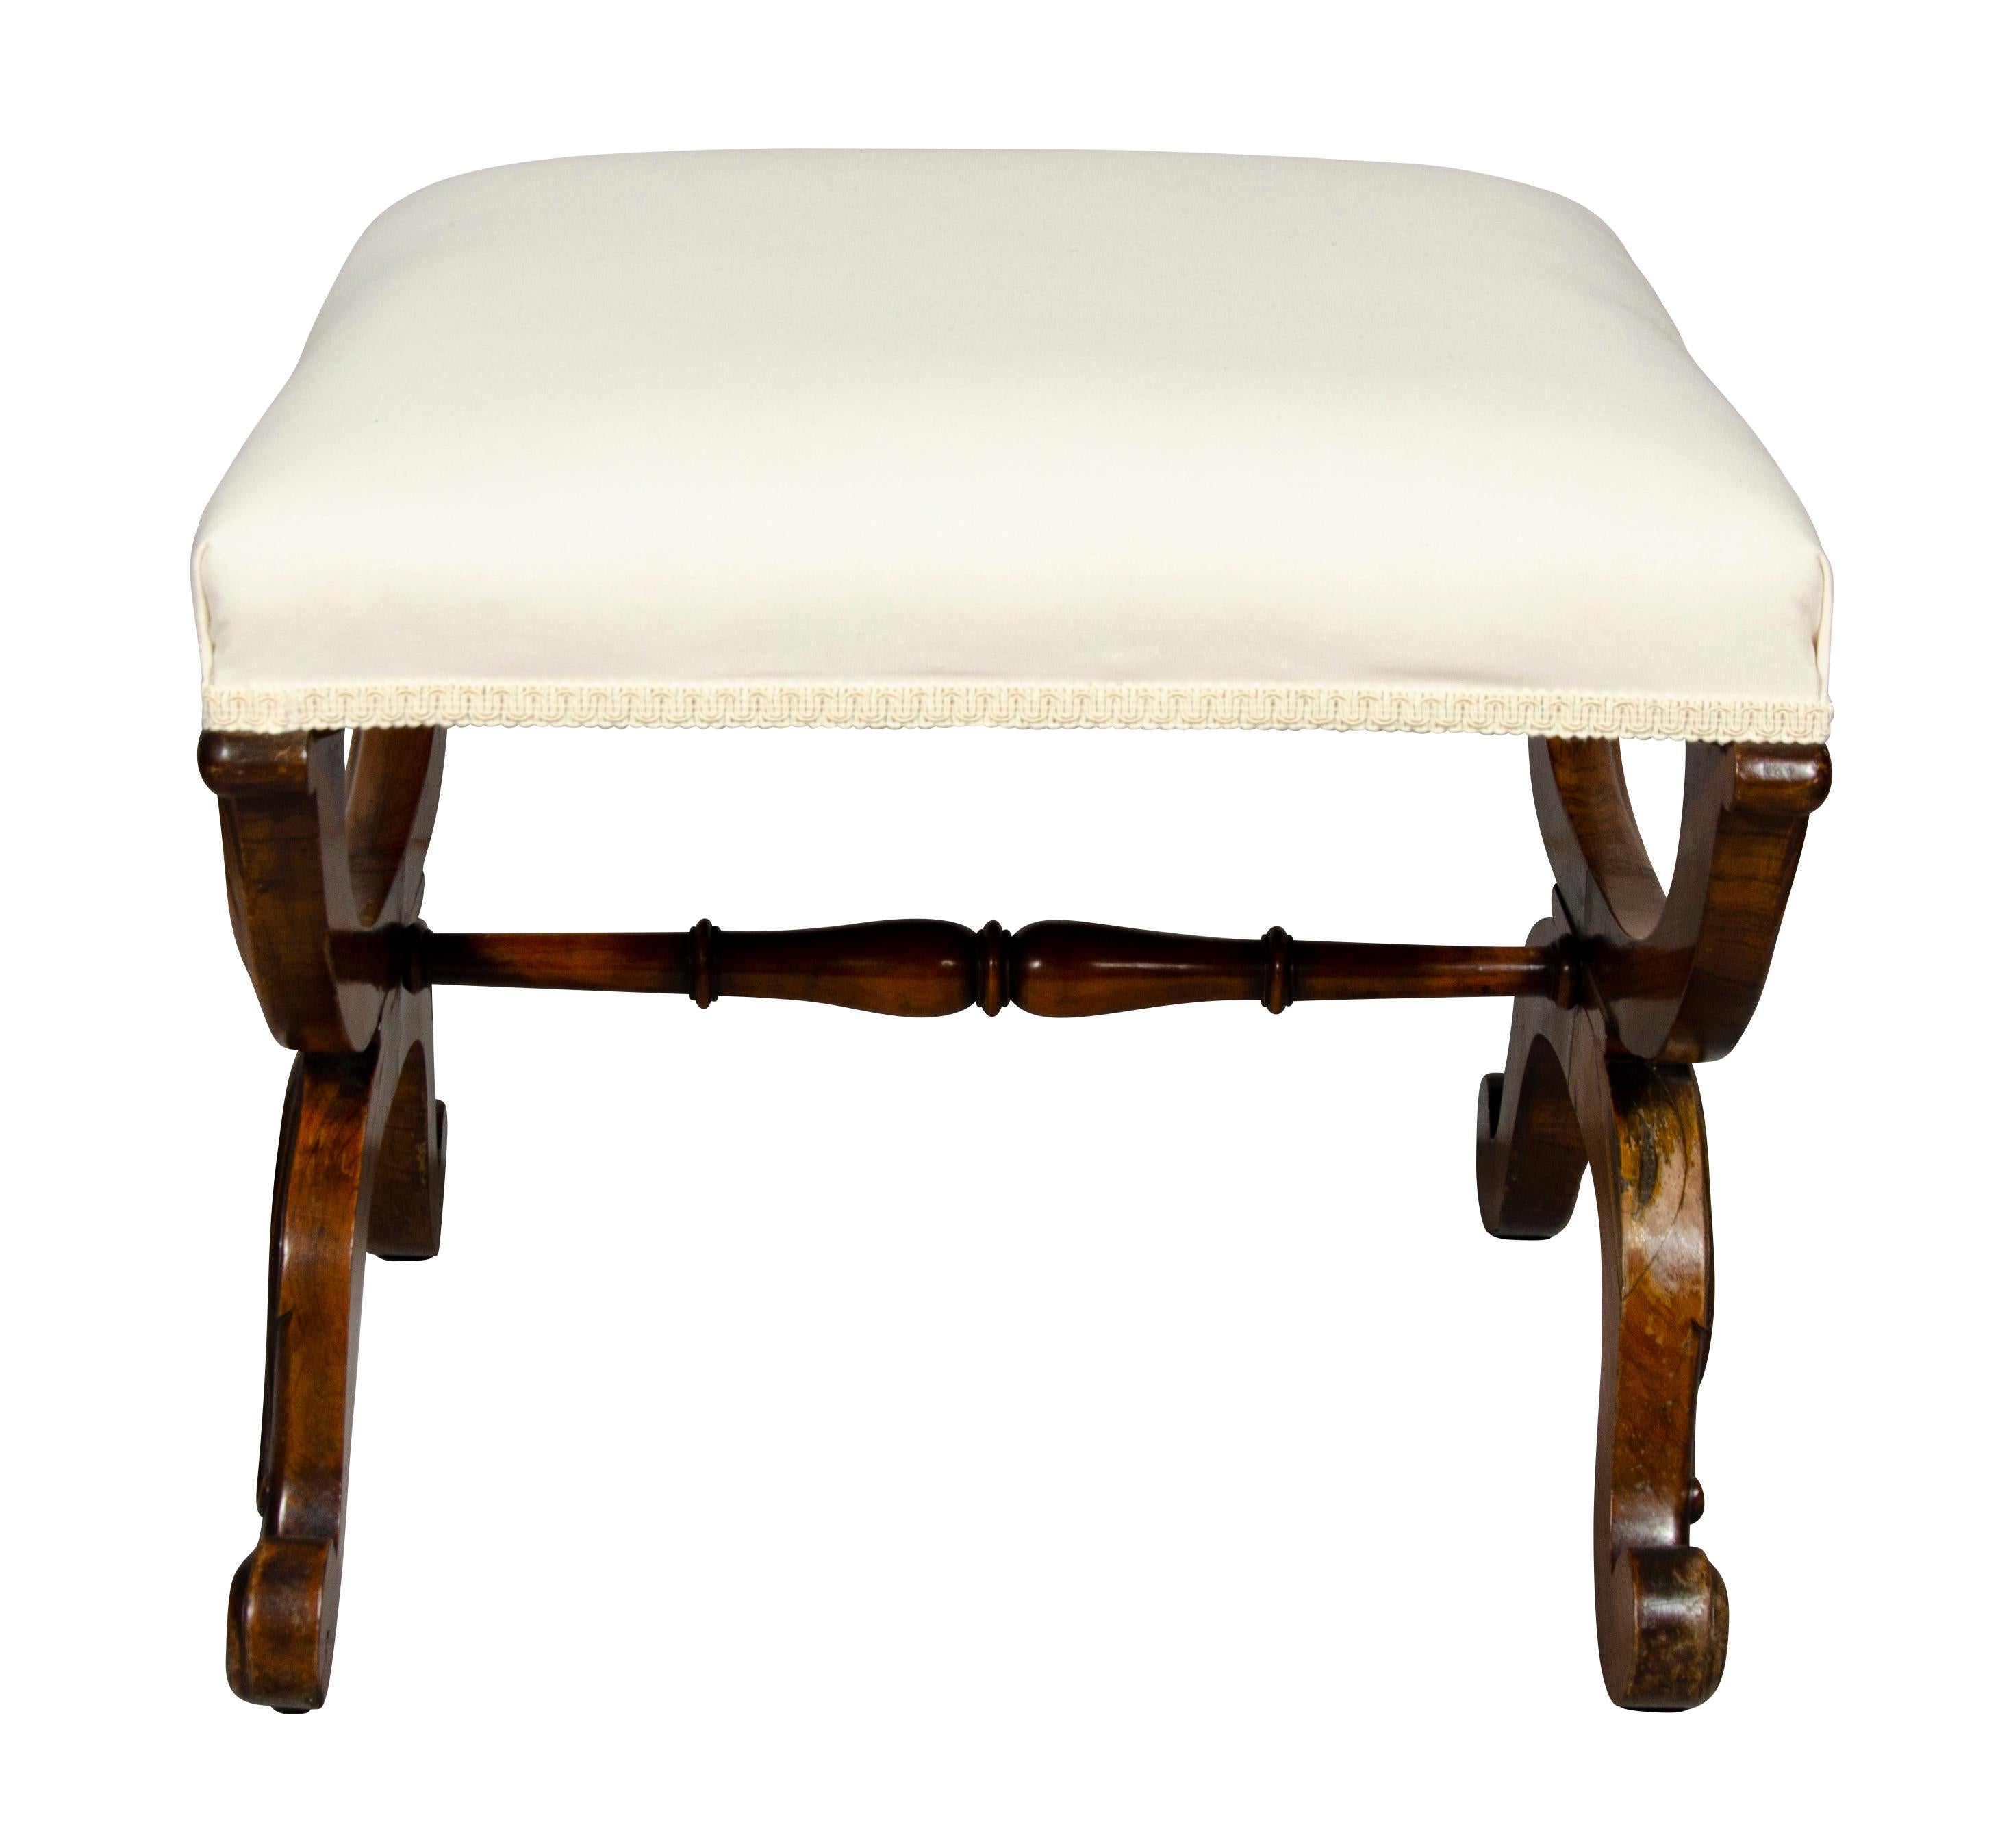 Square newly upholstered in muslin seat with carved X form legs with scroll feet, turned stretcher.